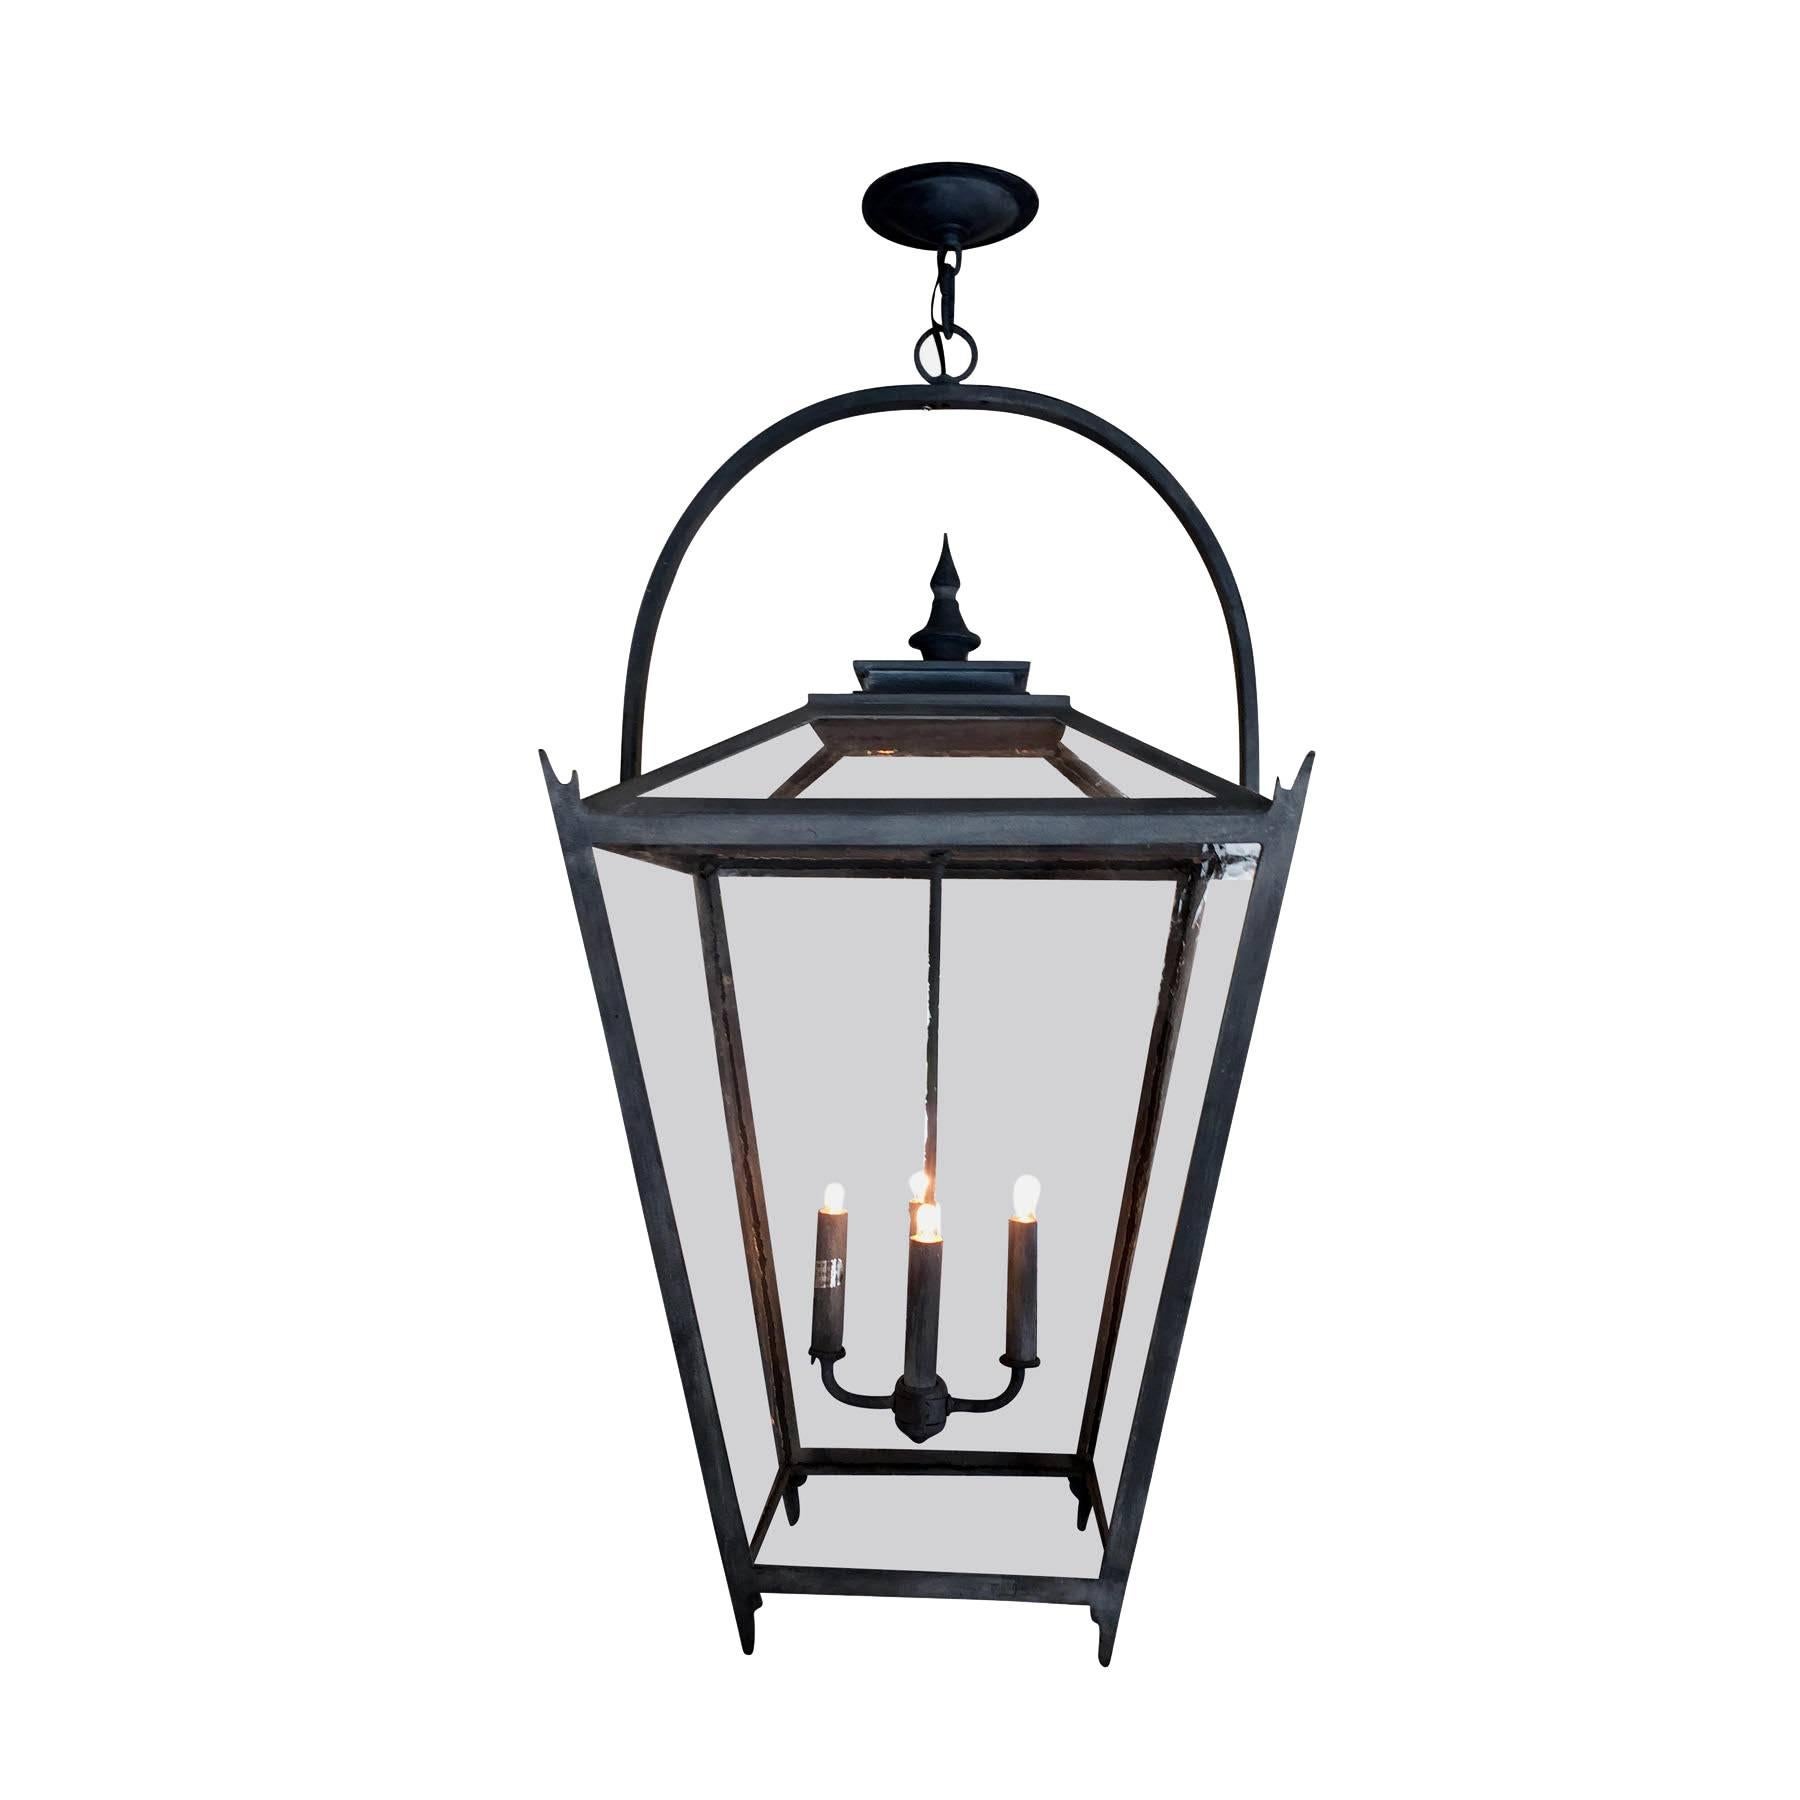 This vintage inspired wrought iron pendant exudes classic styling and minimalist beauty with a traditional tapered shape, glass roof and embellished top.  Perfect for lighting kitchen islands or covered verandas and porches.  Created in